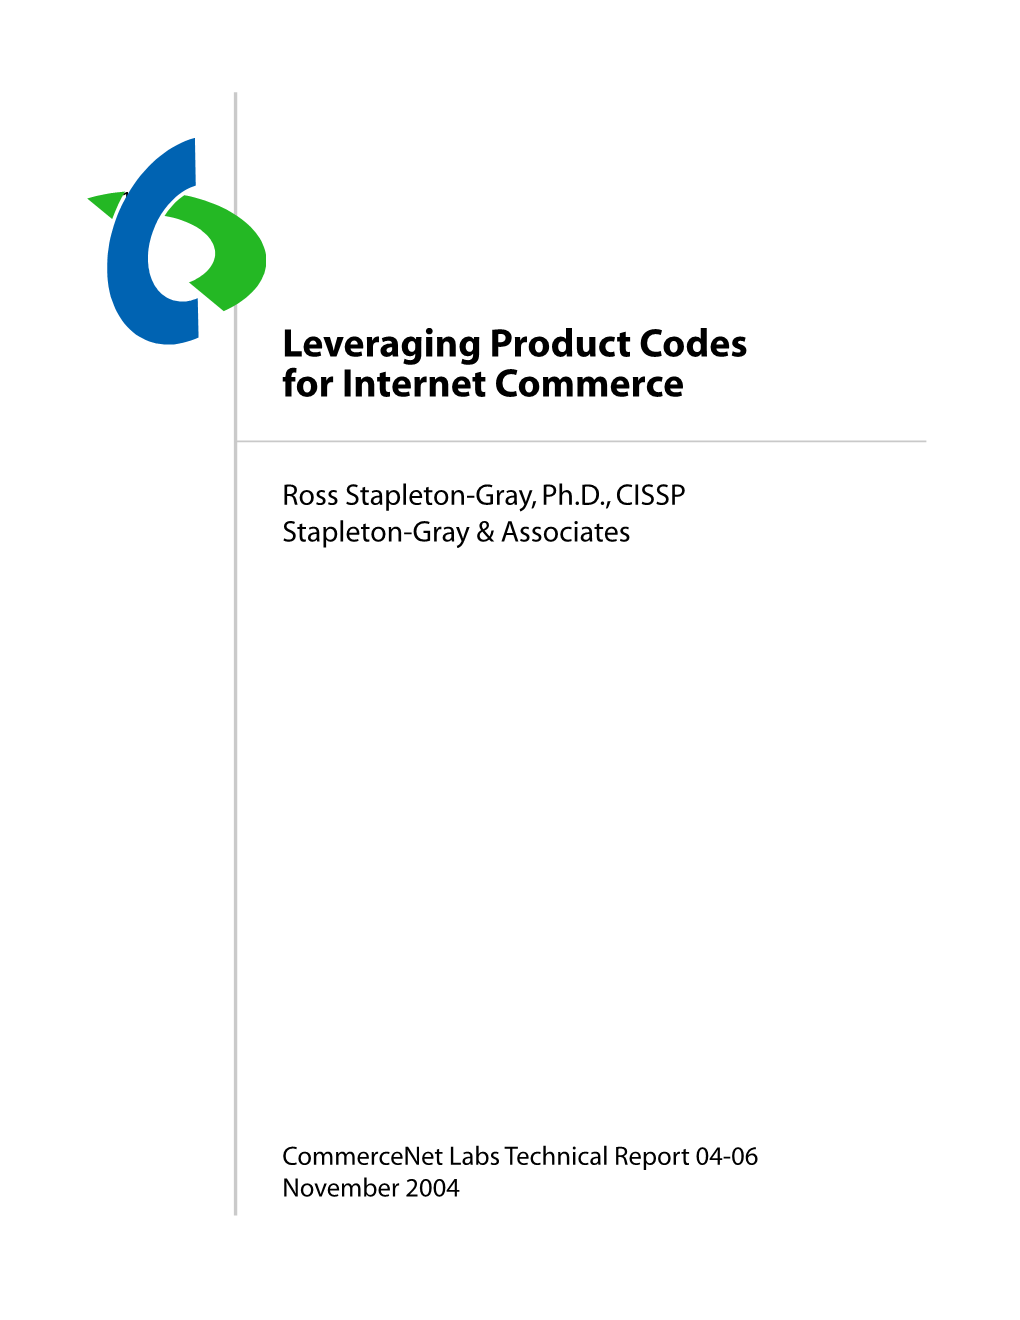 Leveraging Product Codes for Internet Commerce